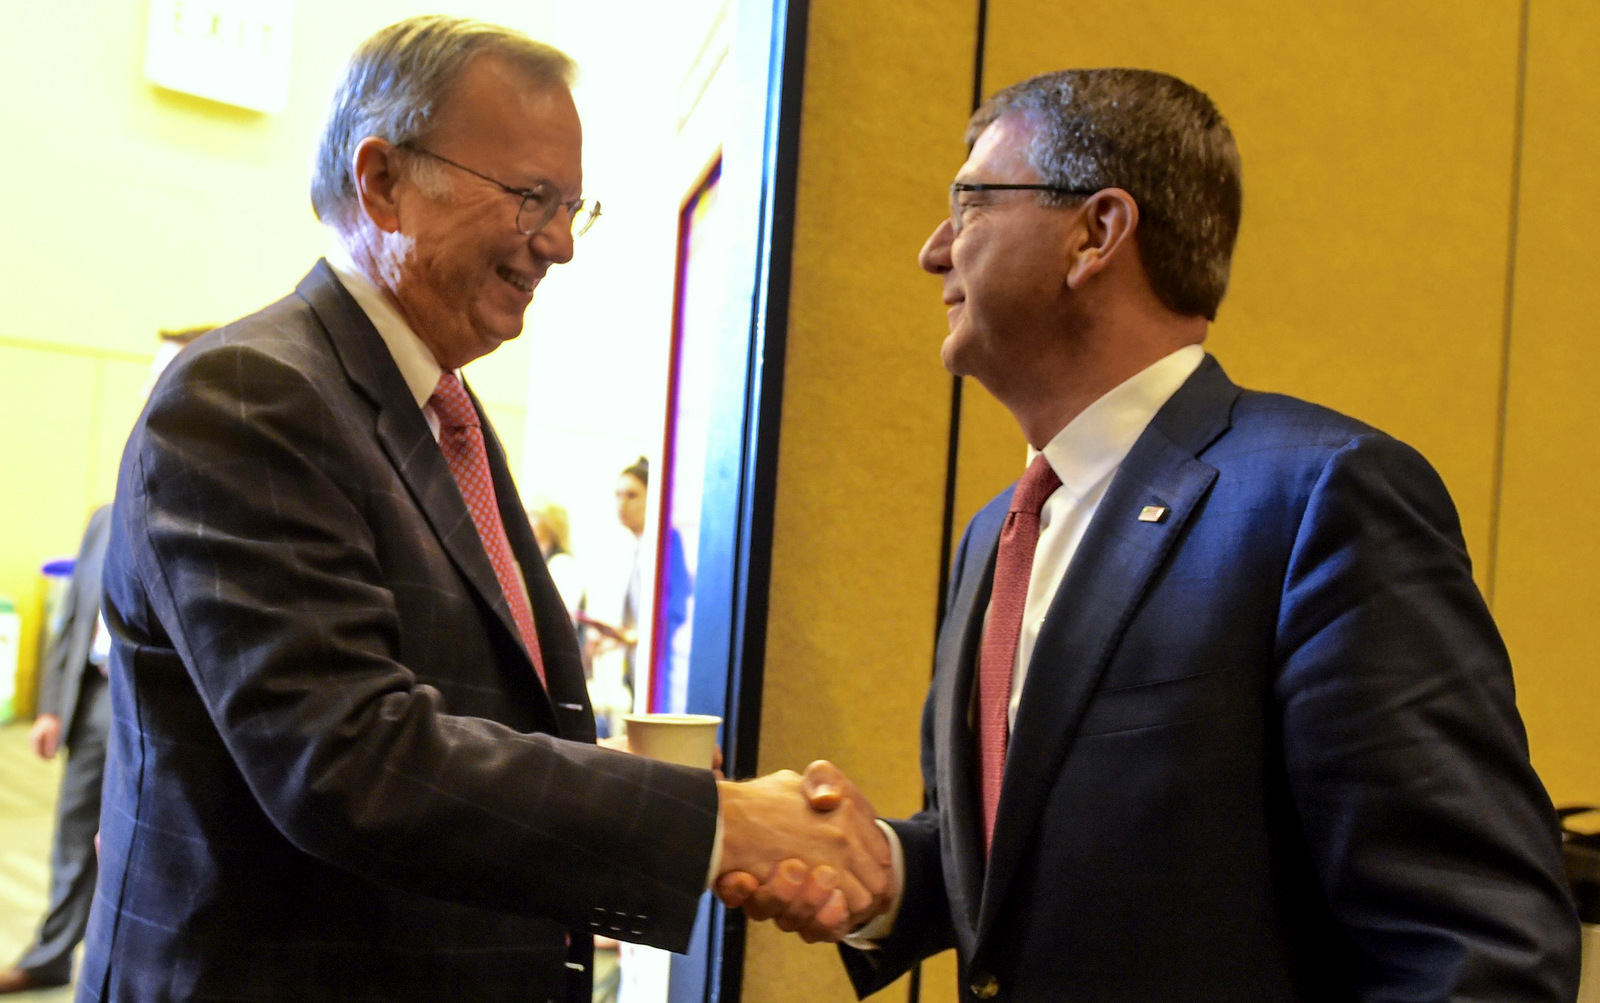 Defense Secretary Ash Carter meets with Eric Schmidt, executive chairman of Google parent company Alphabet and new chairman of the first DoD Innovation Advisory Board, during the RSA Security Conference in San Francisco, March 2, 2016. DoD photo by Navy Petty Officer 1st Class Tim D. Godbee